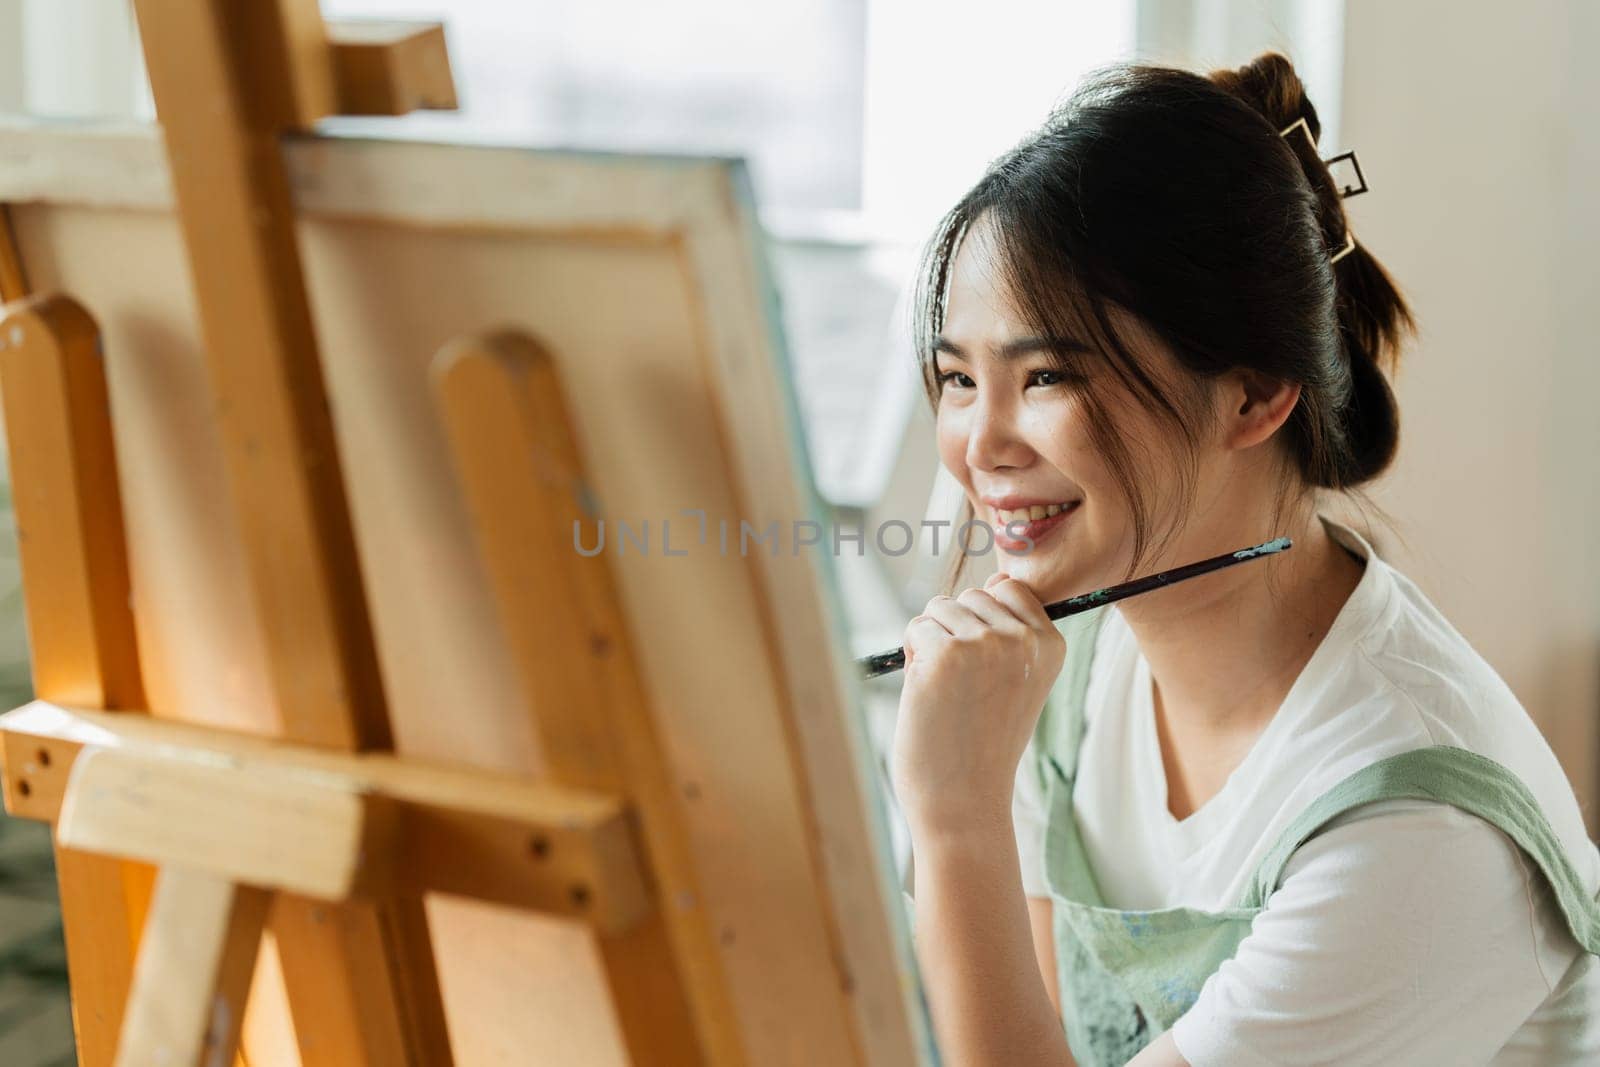 A beautiful young woman artist working on painting something on a large canvas.